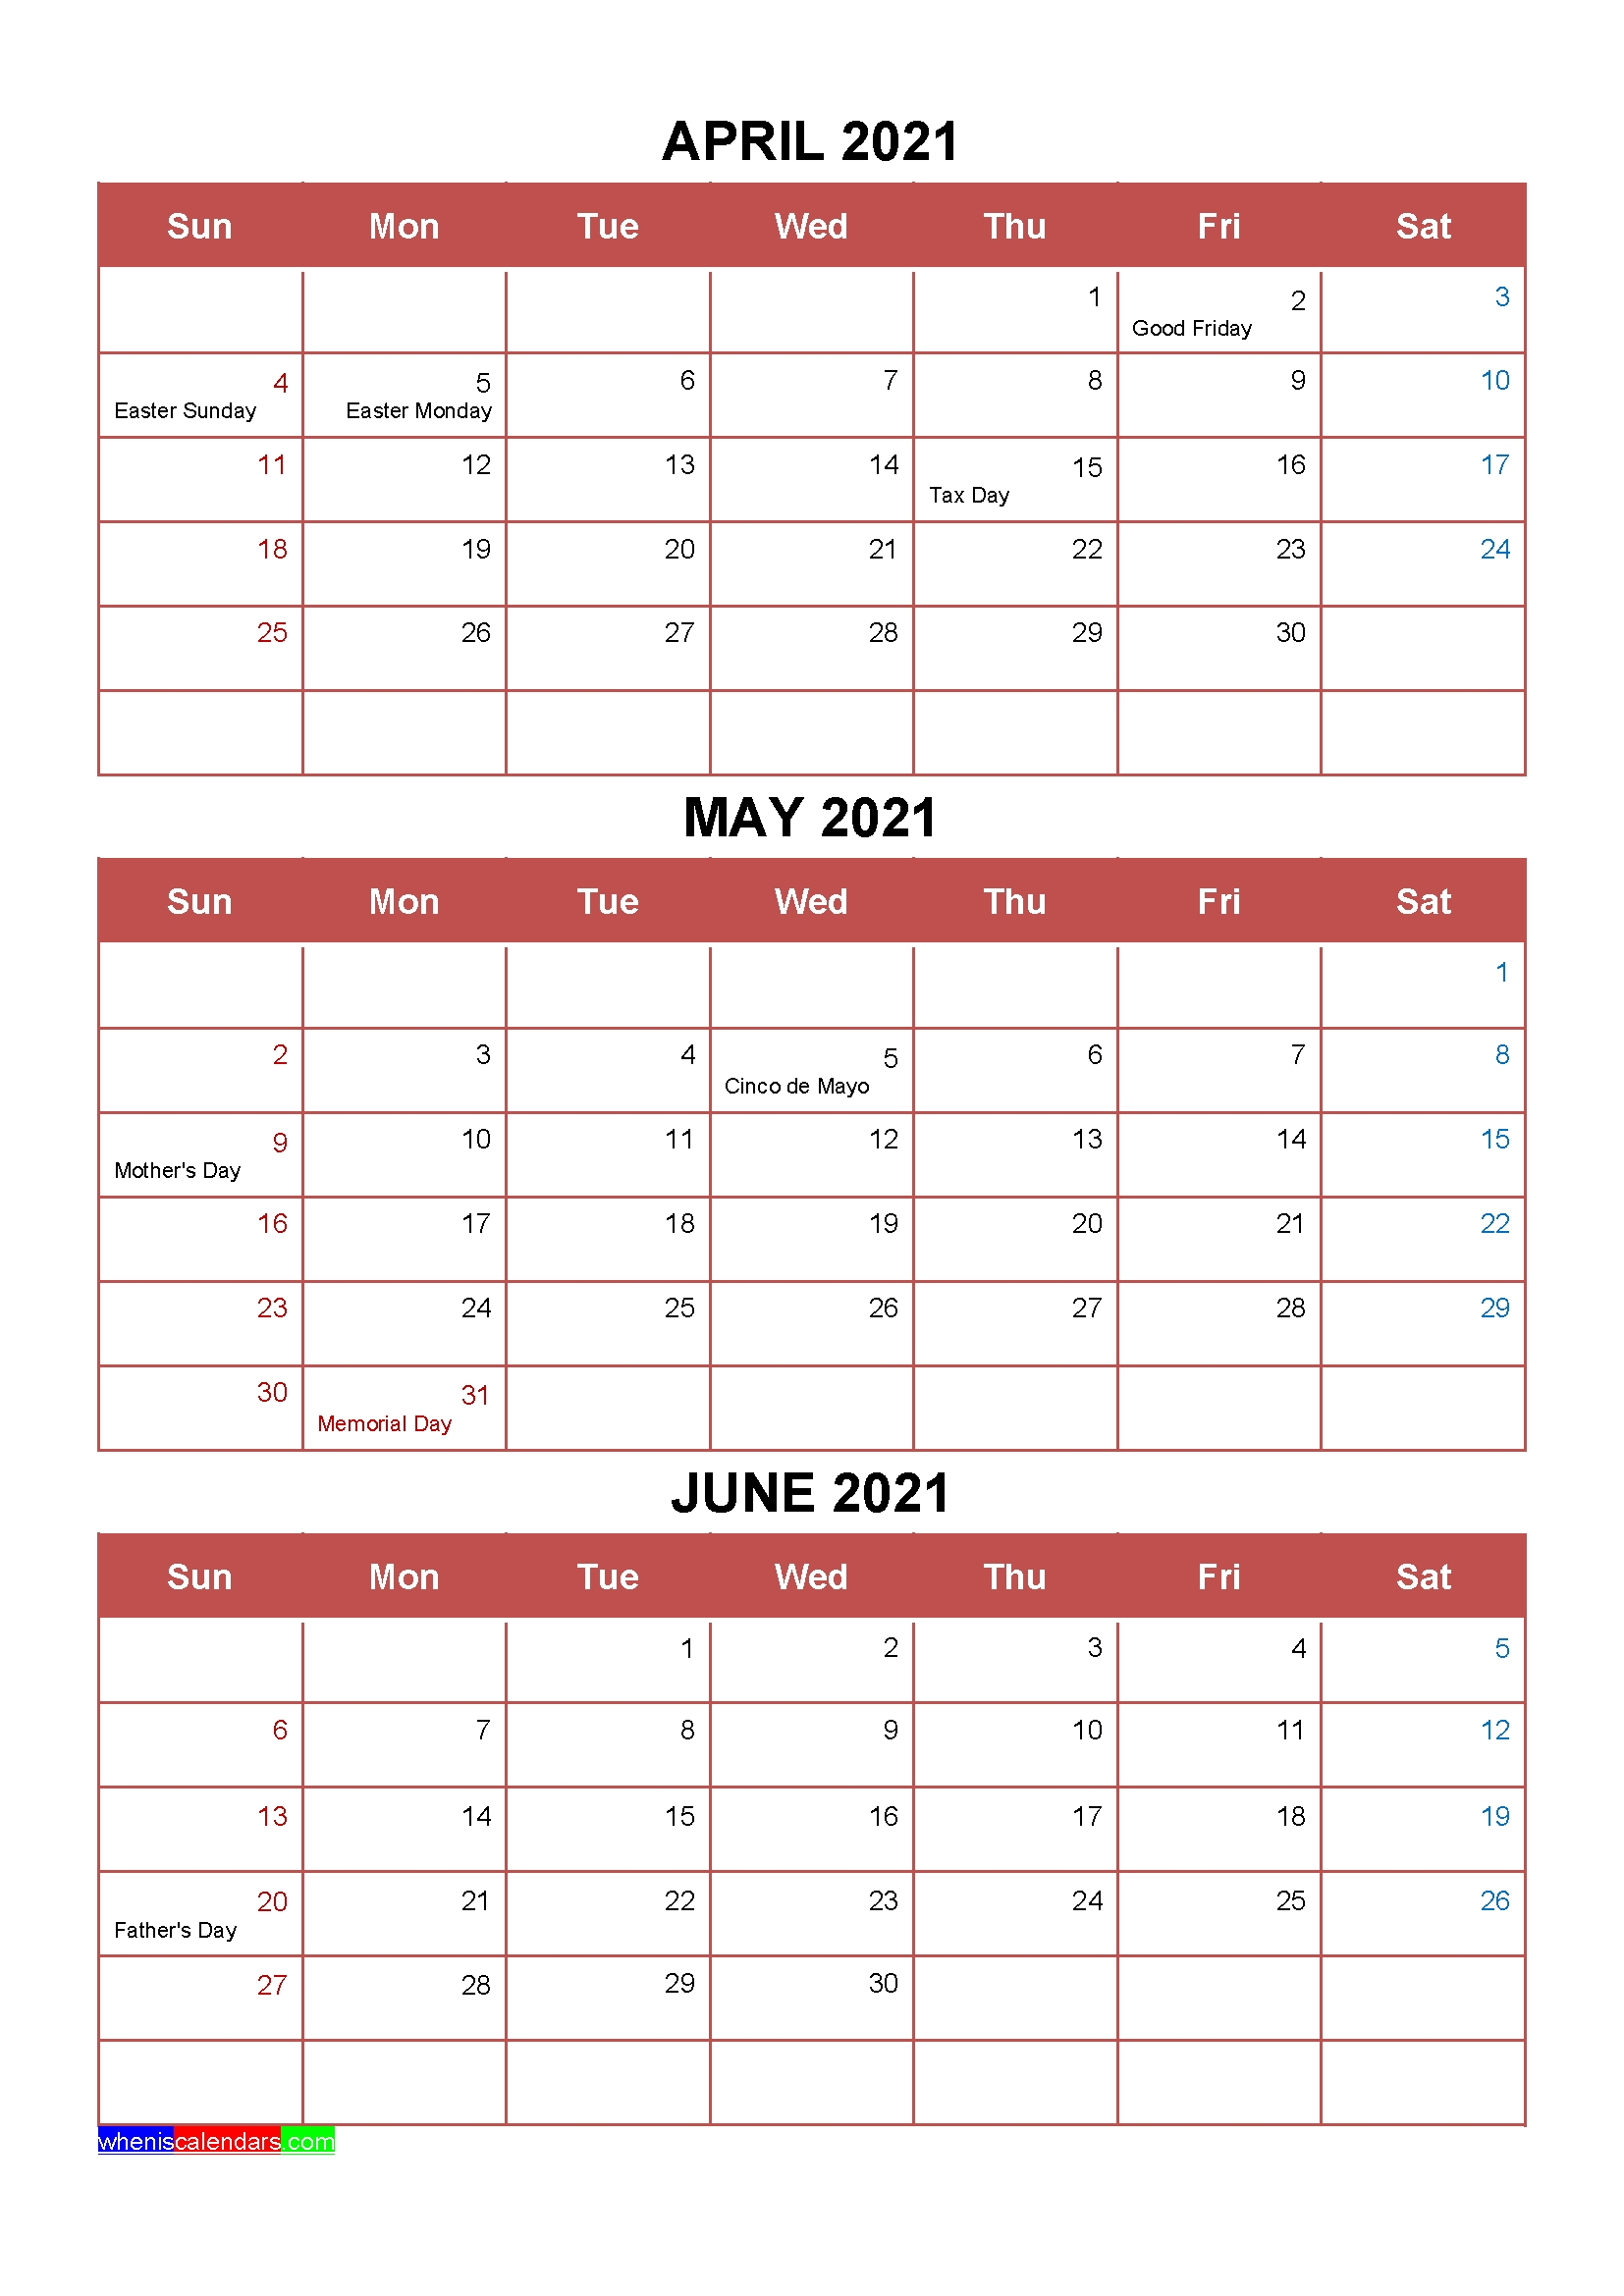 Calendar By Quarter 2021 | Month Calendar Printable within Free Printable Calendars-Yearly-Denoting Weeks Within Month